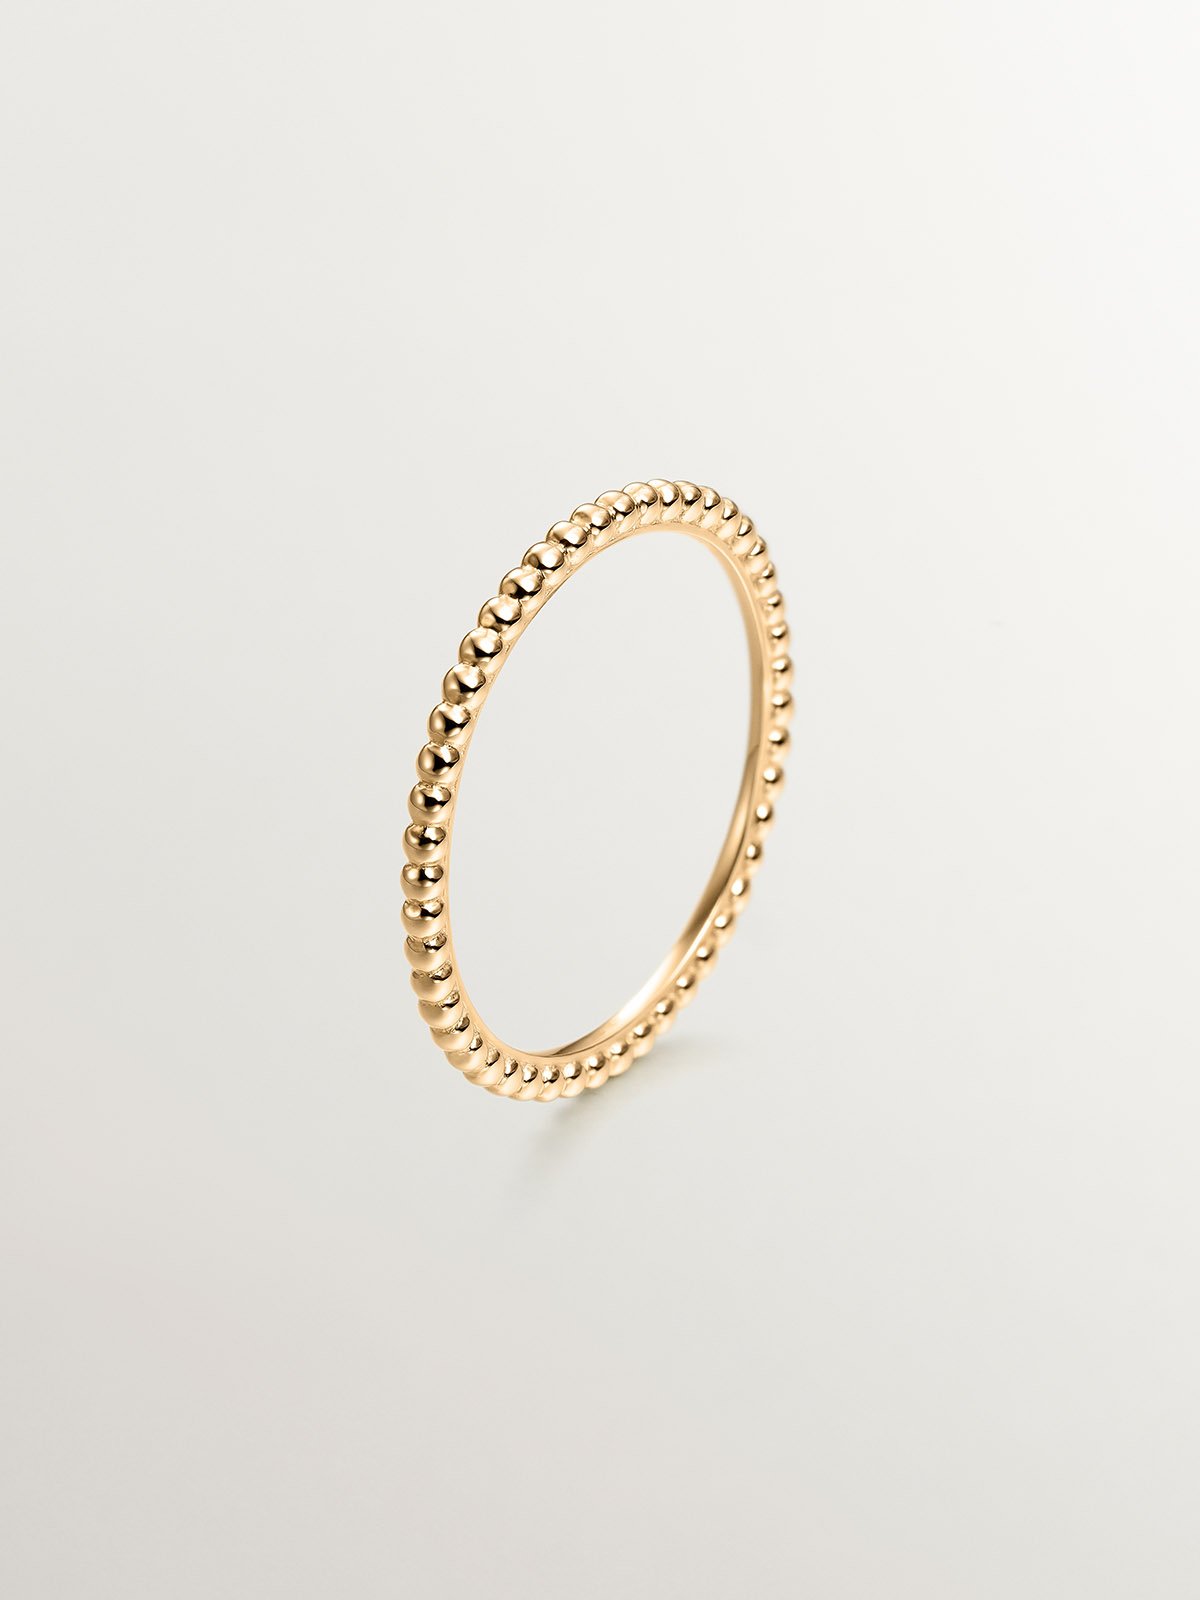 9K Yellow Gold Ring with Beads